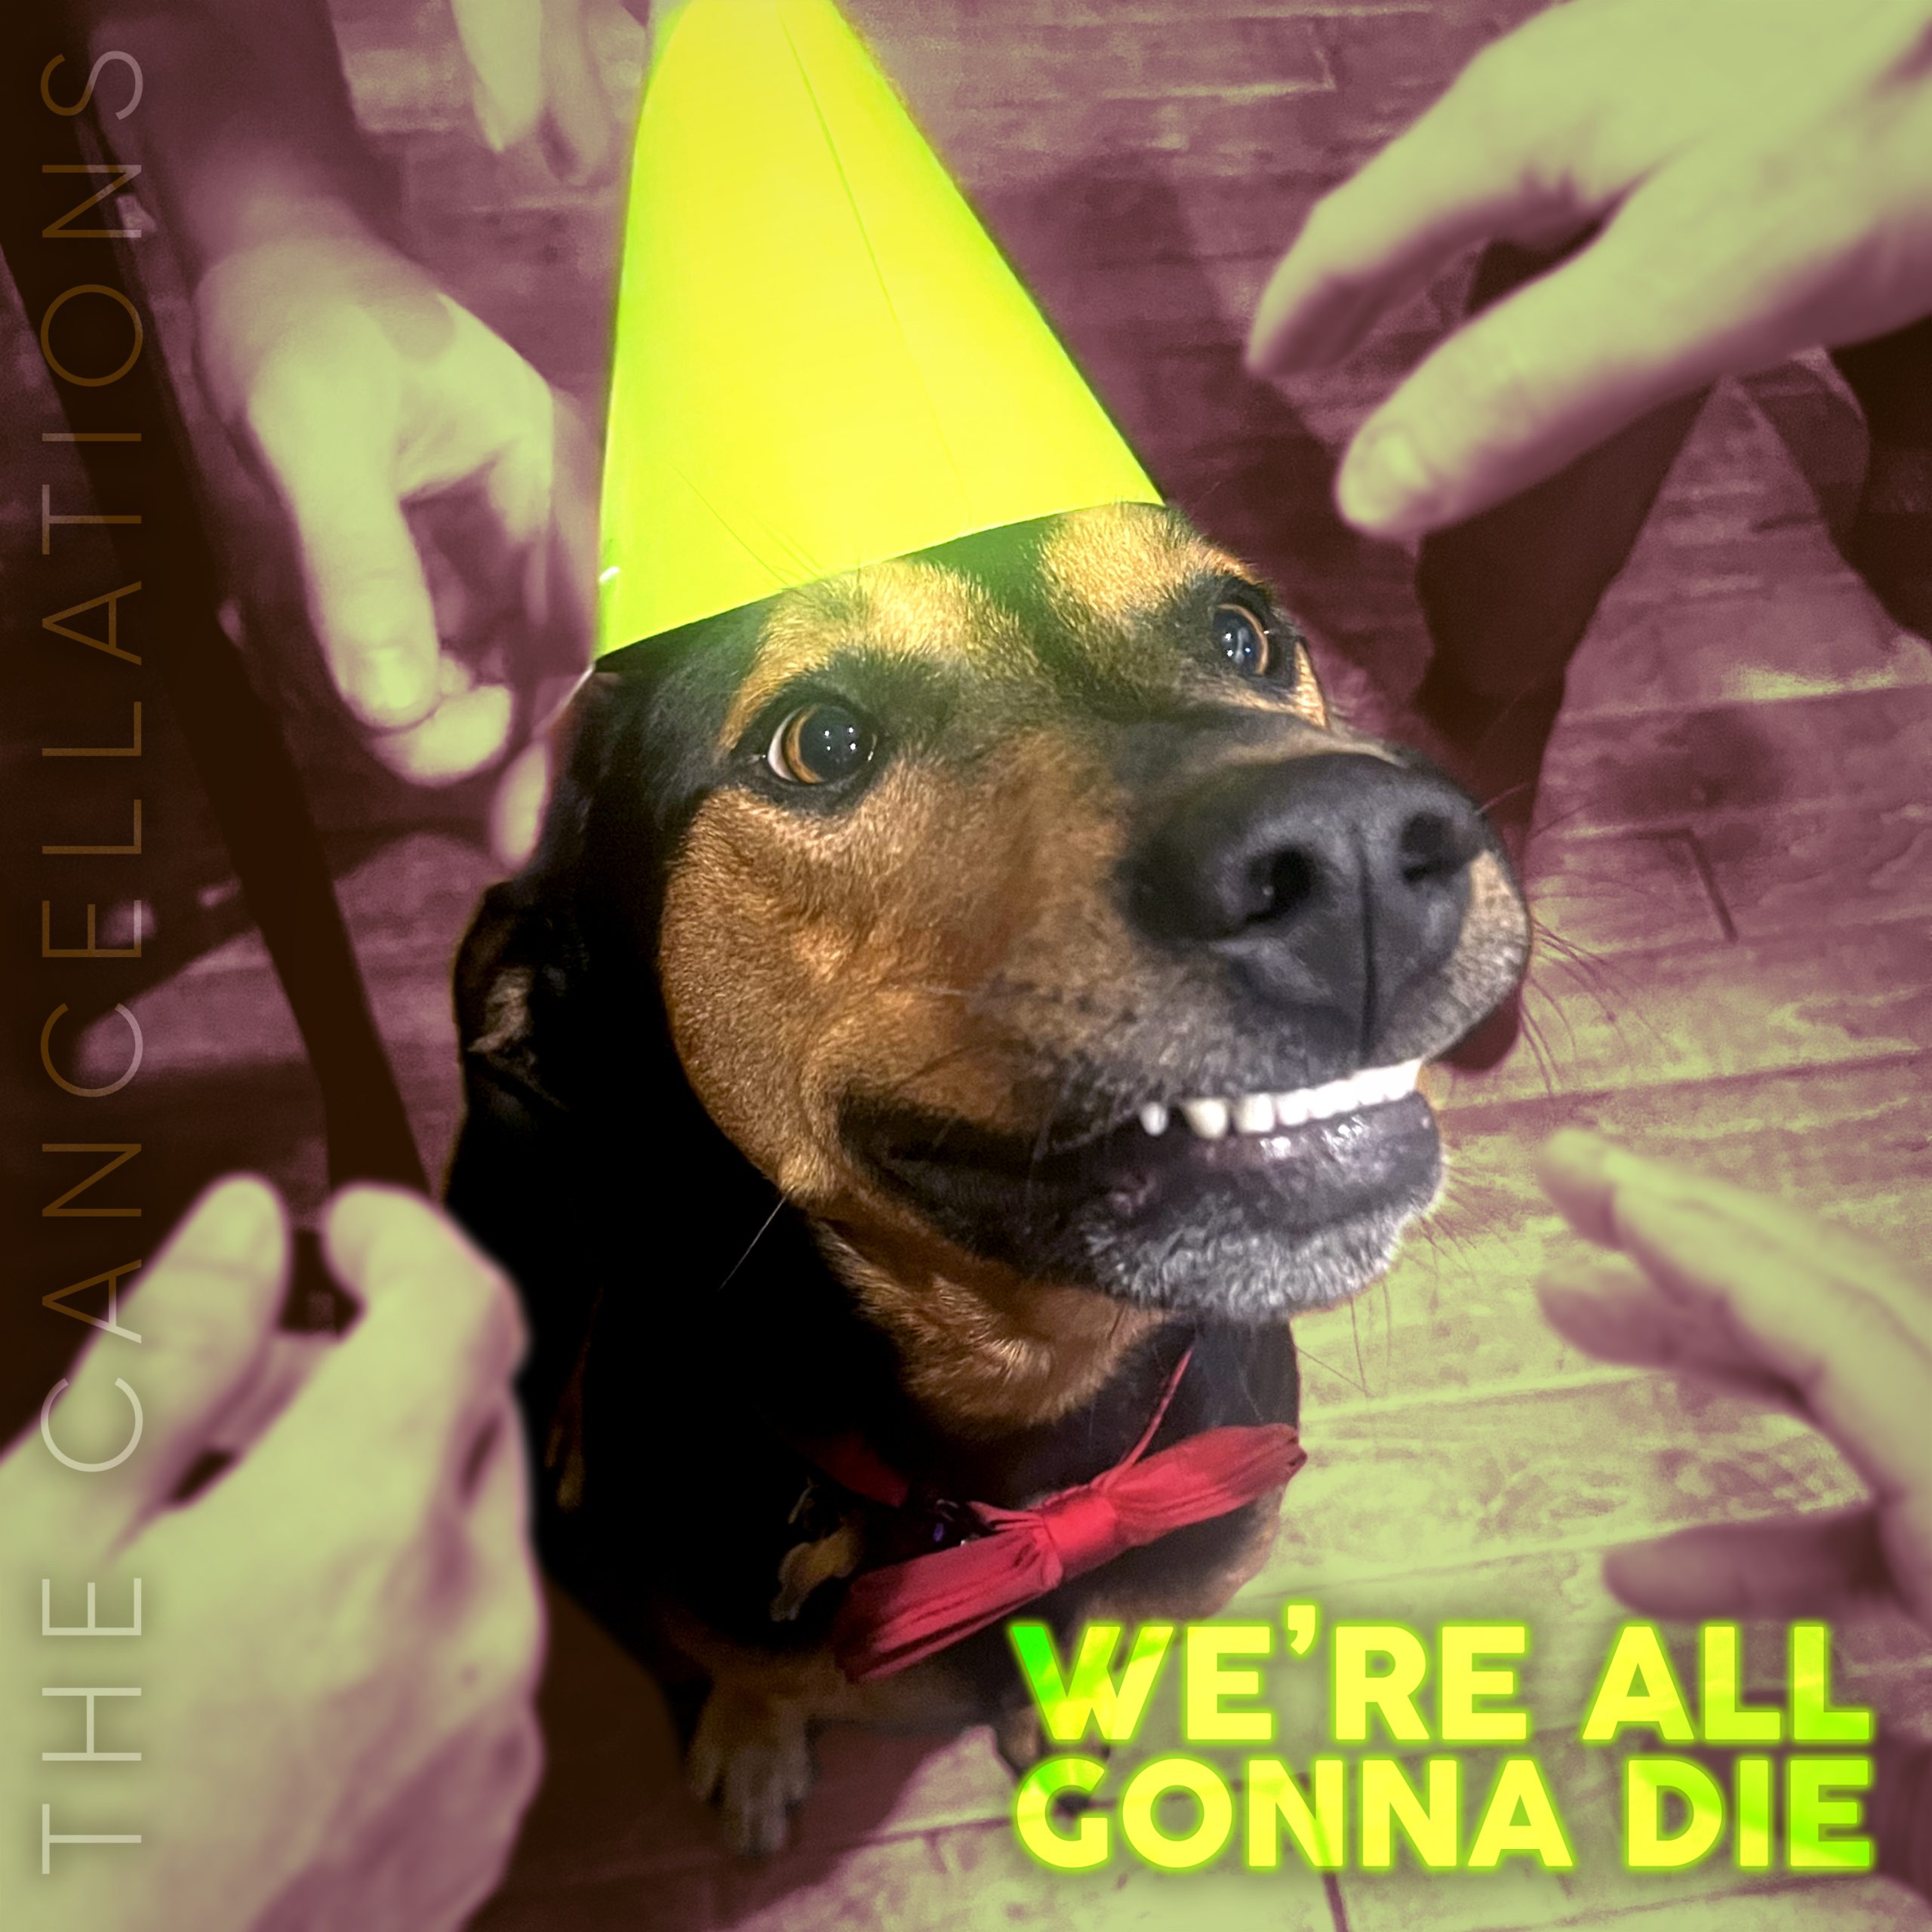 The album cover for "Smile, We're All Gonna Die" featuring a smiling dog wearing a party hat and a bowtie while several masculine hands reach towards him. The song title "We're All Gonna Die" appears in the lower righthand corner in a hideous yellow color that matches the party hat.